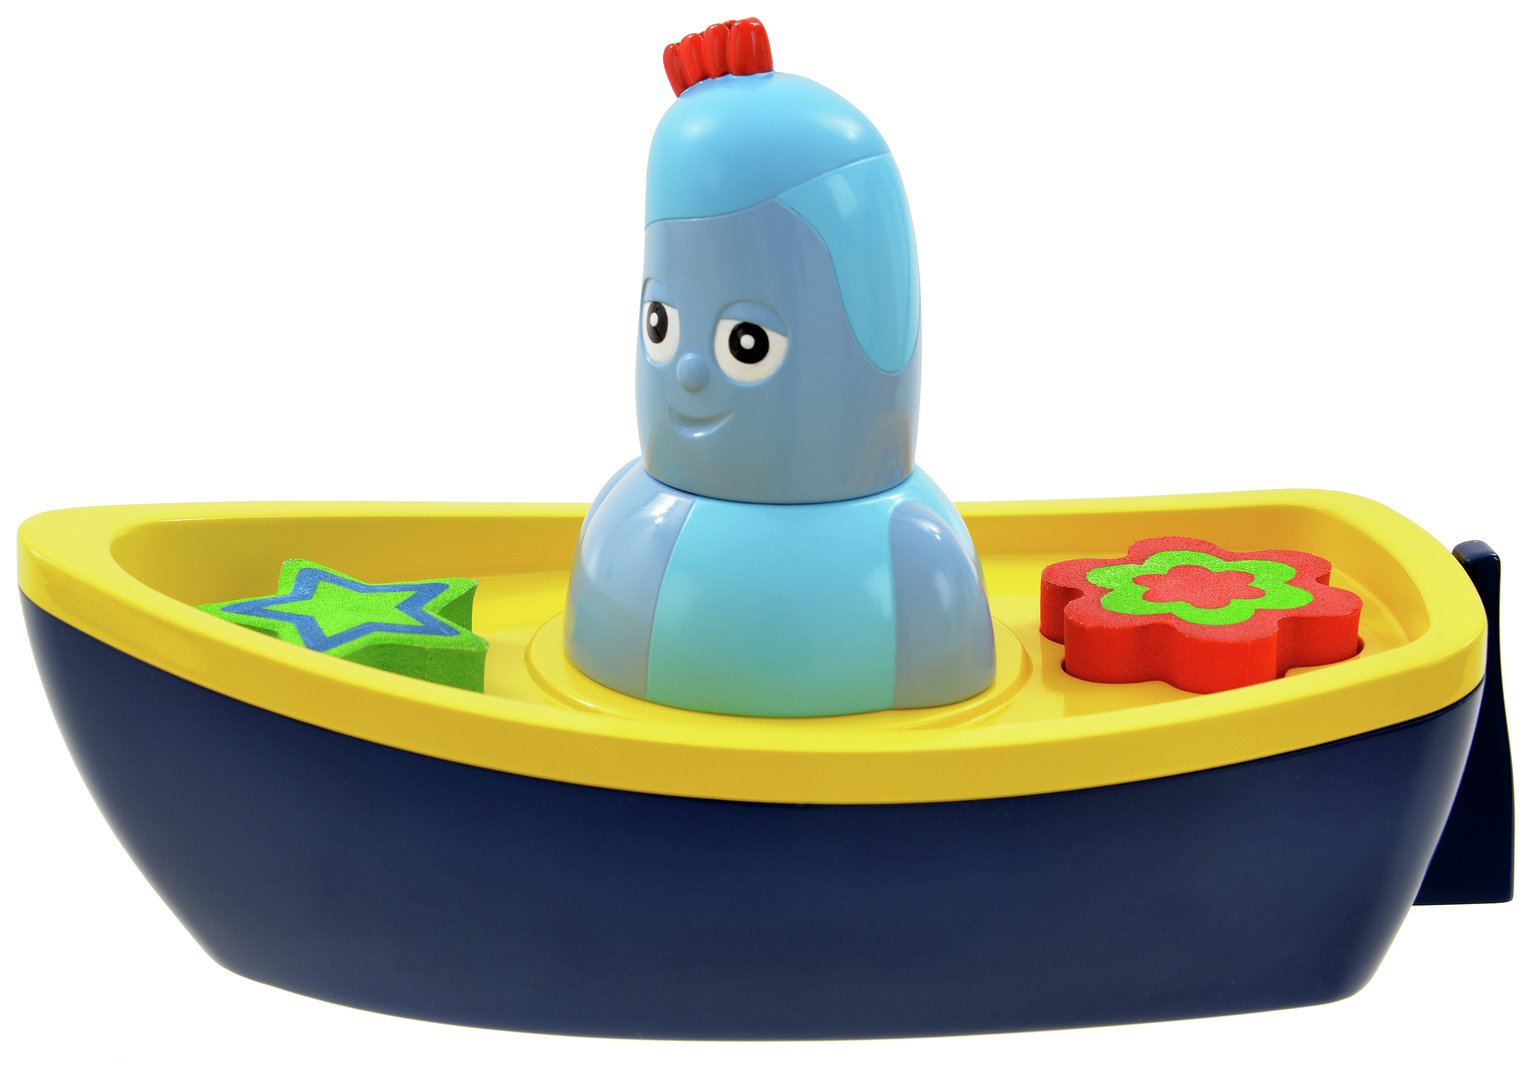 In The Night Garden Iggle Piggle's Lightshow Bath Time Boat review